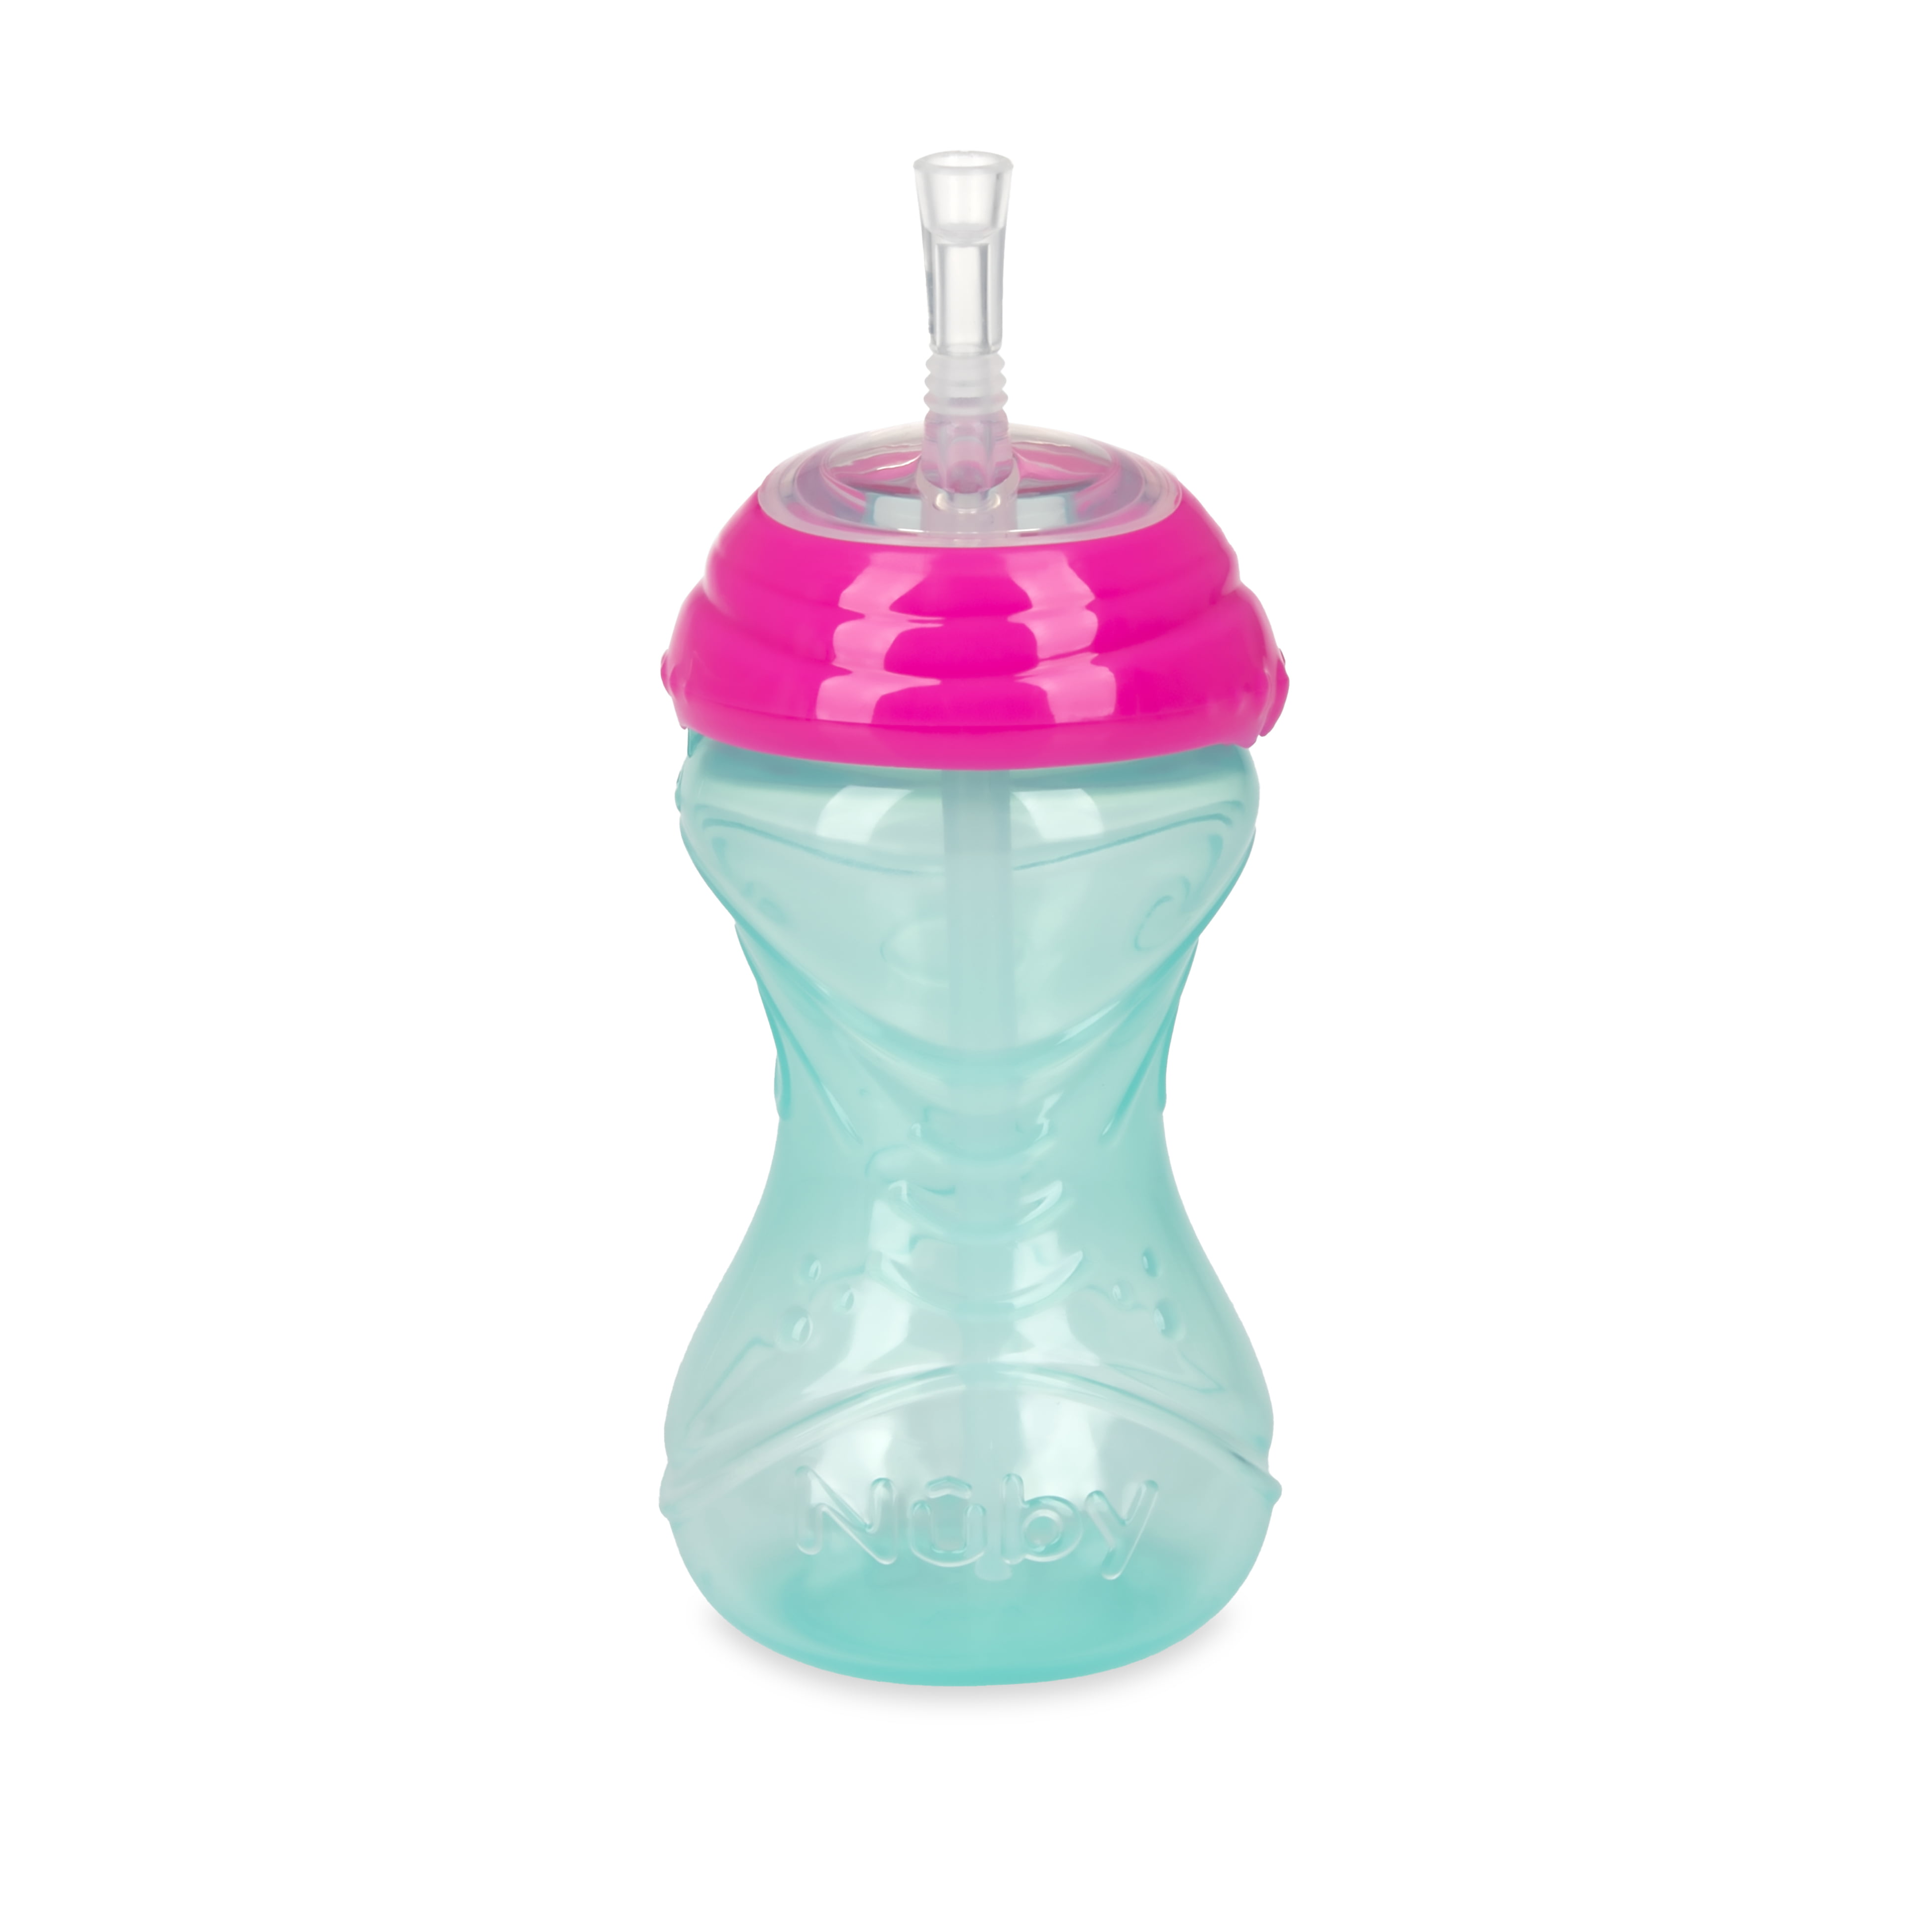 Clik-It Flex Straw Leakproof Sippy Cup (2 Pack)